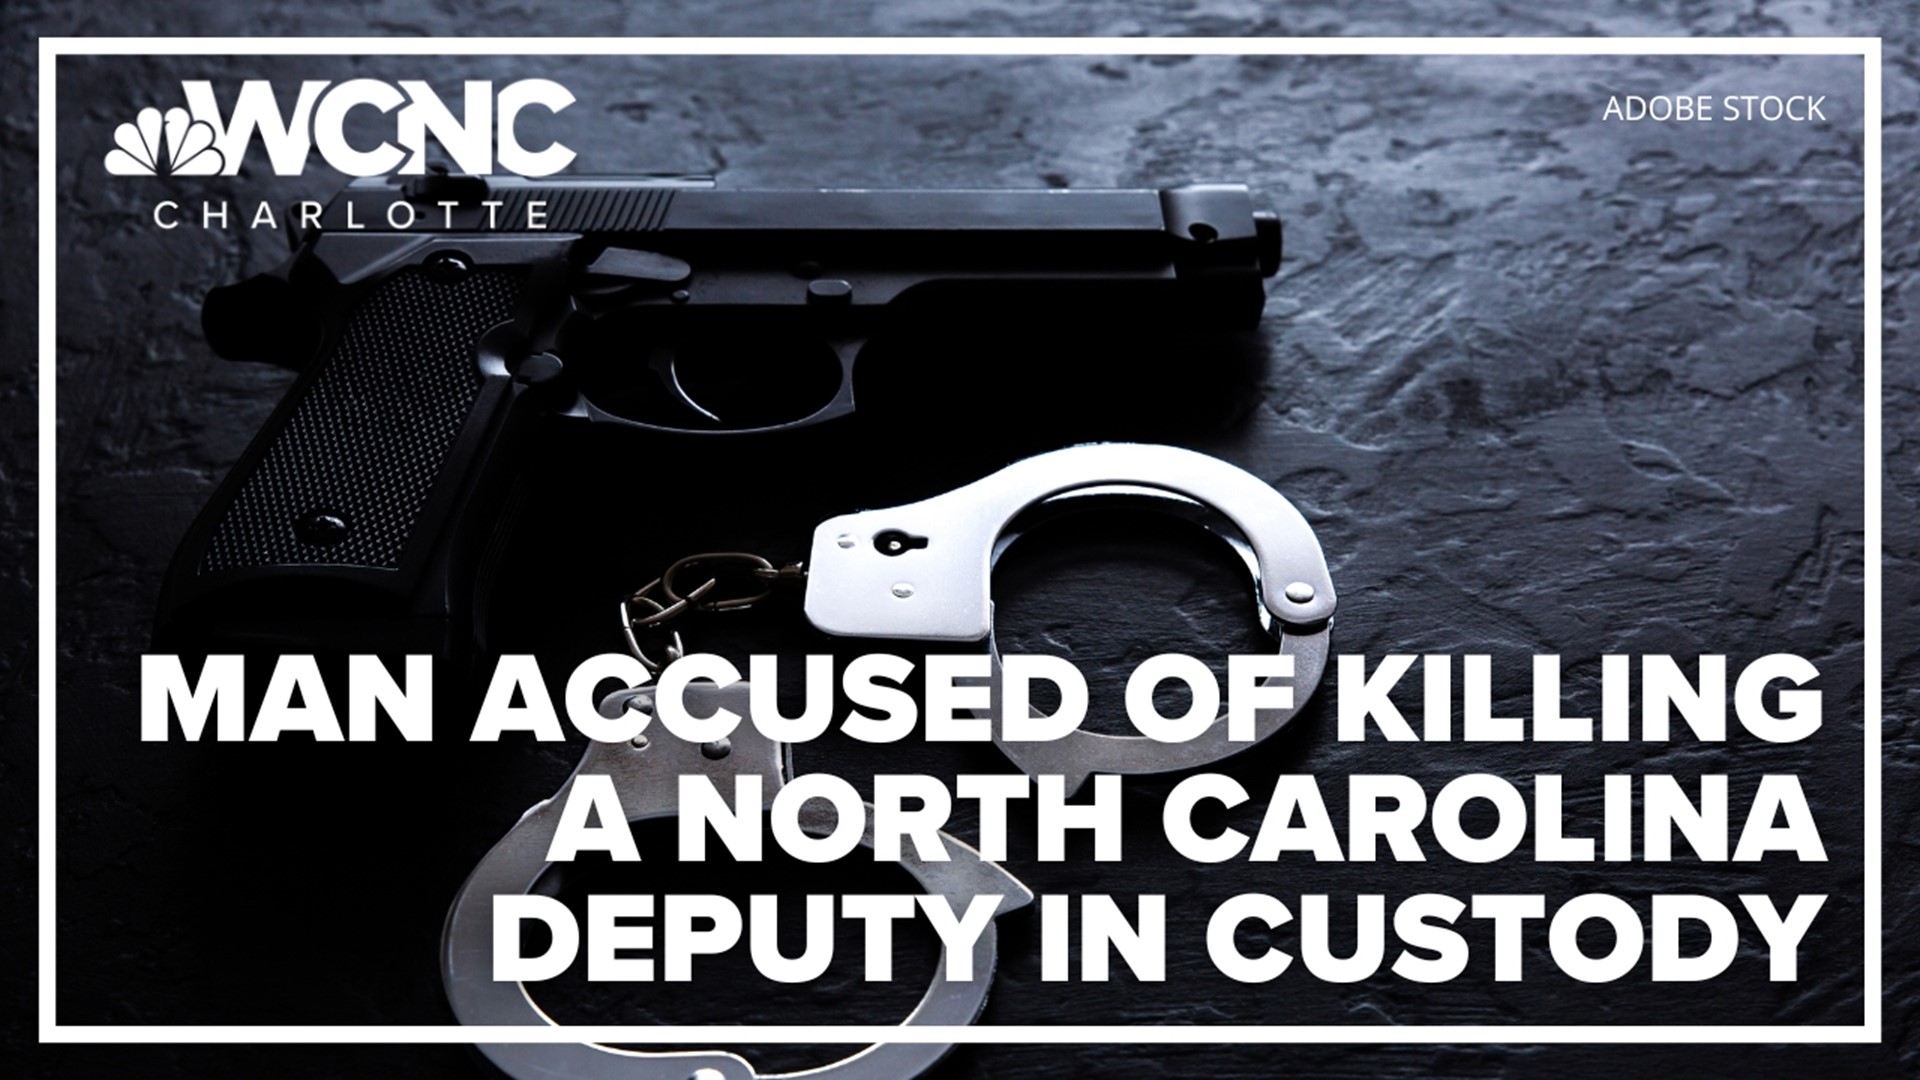 The man accused of killing a North Carolina deputy is facing a judge today.